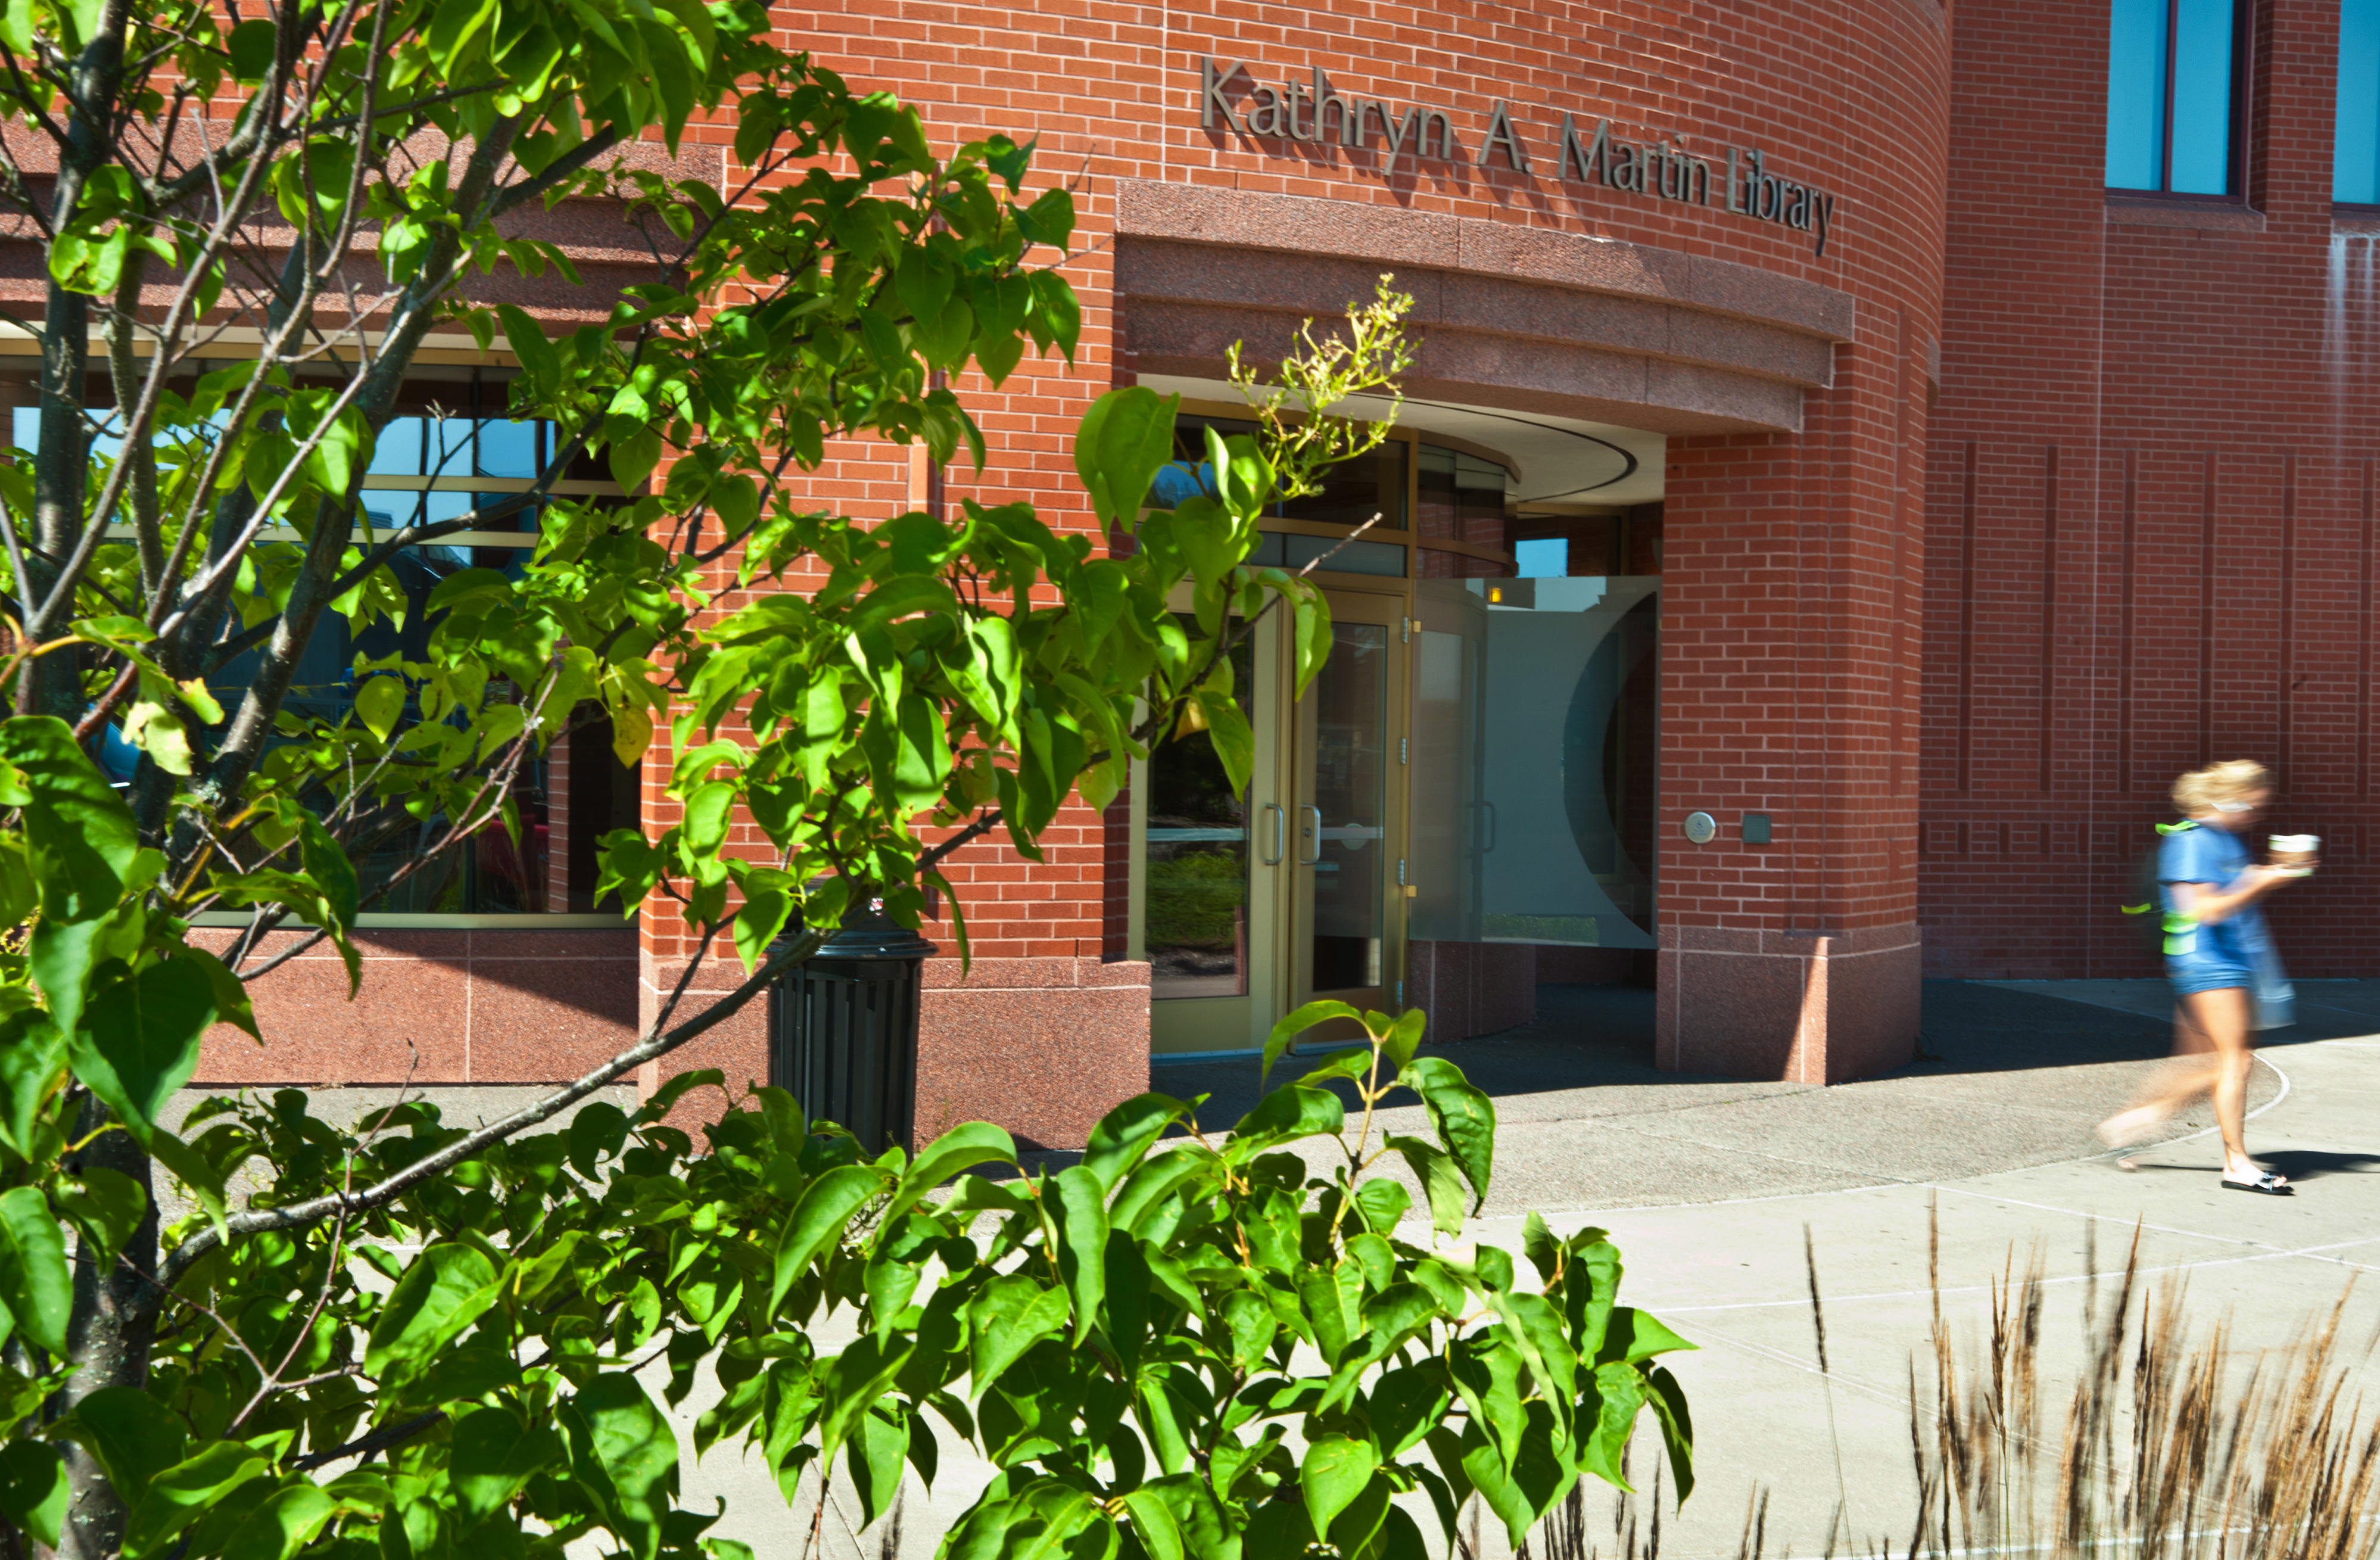 A building with a sign reading "Kathryn A. Martin Library." A student is walking past.